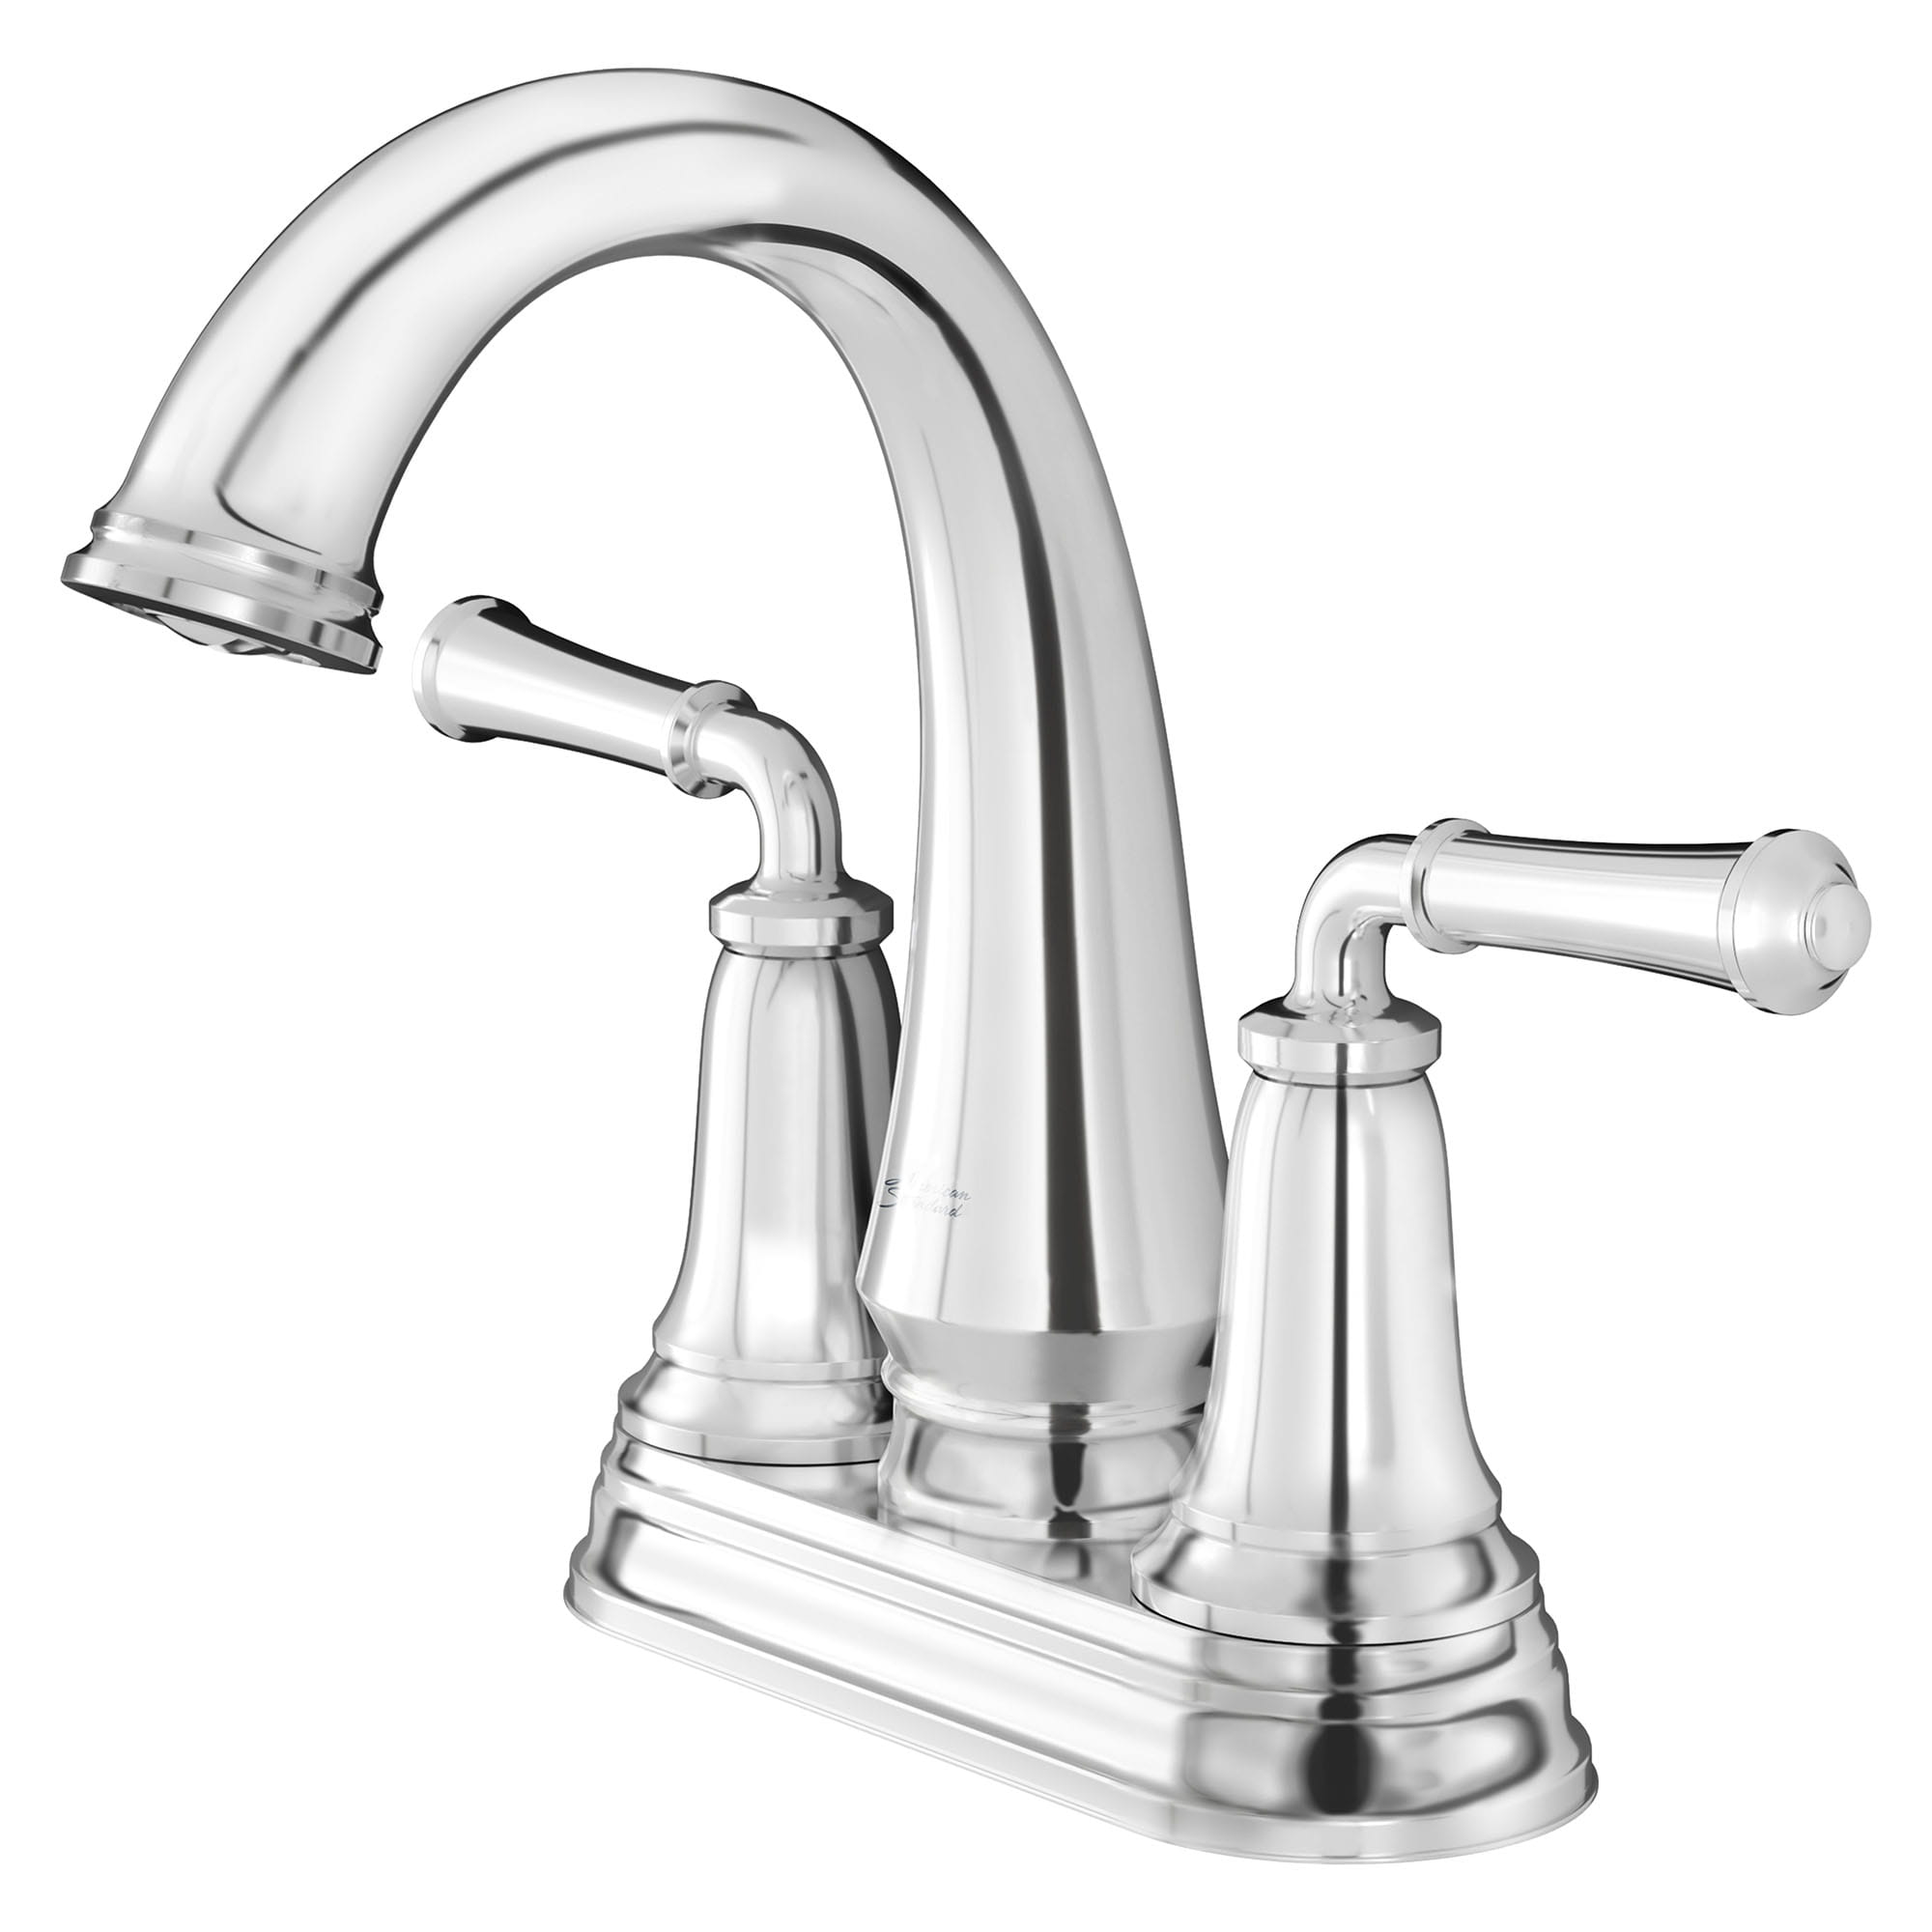 Delancey® 4-Inch Centerset 2-Handle Bathroom Faucet 1.2gpm/4.5 L/min With Lever Handles